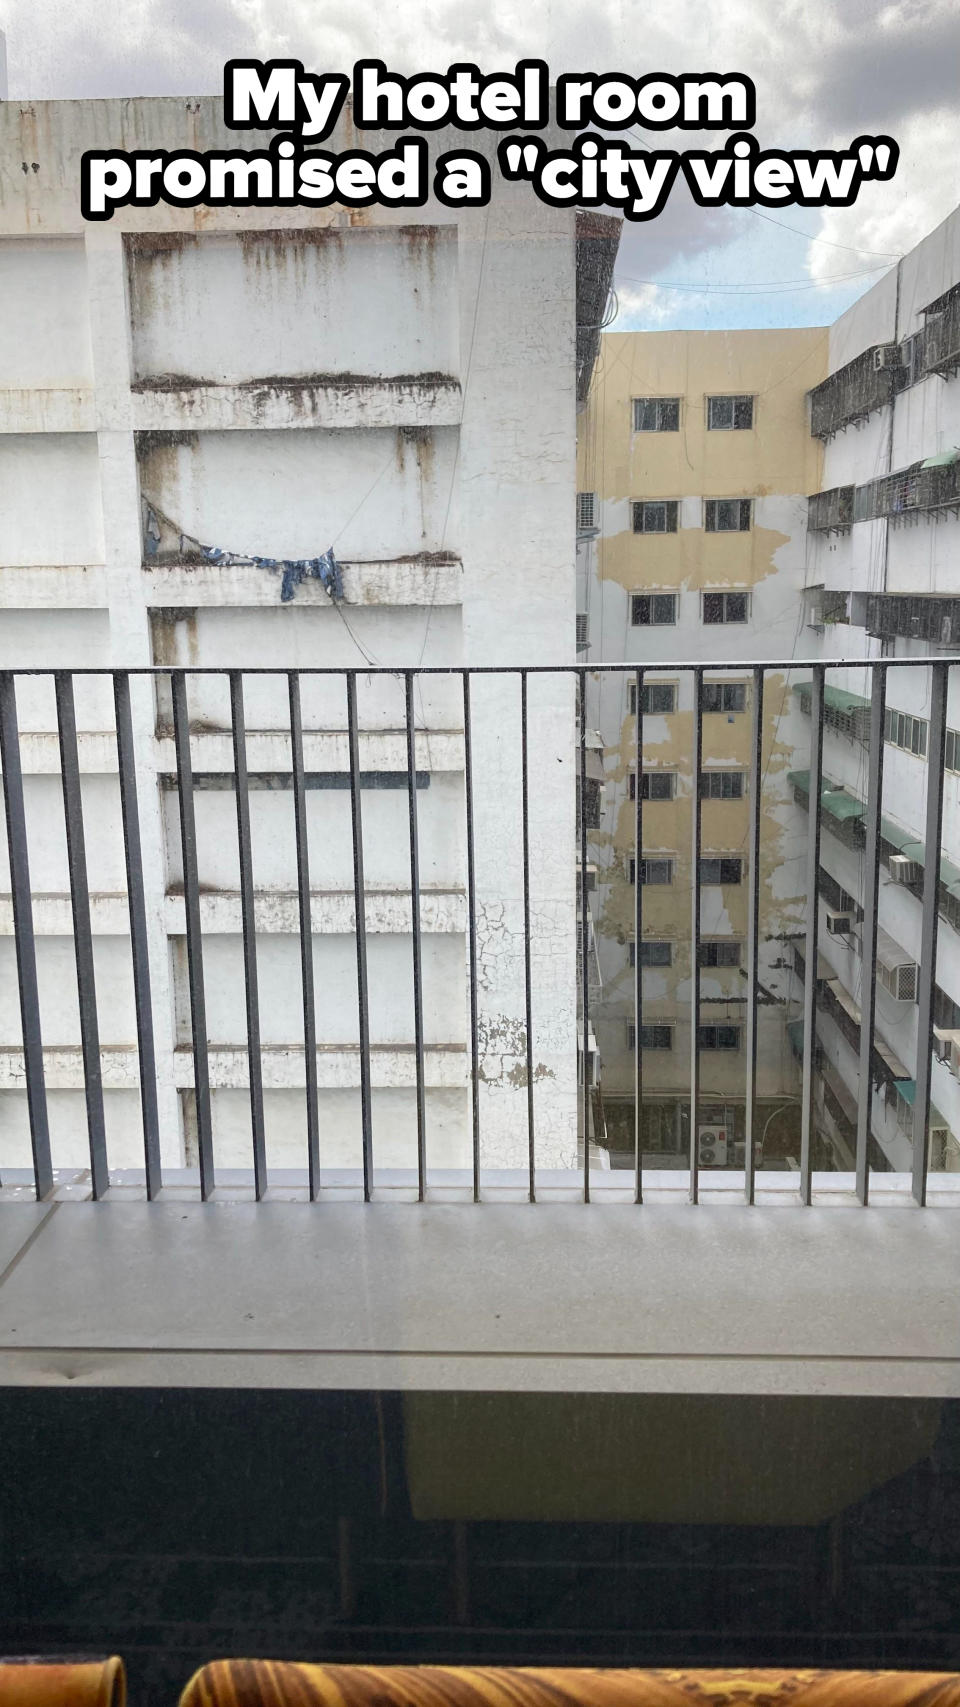 The back of a gray, nondescript, badly painted, boarded-up building seen from a balcony, with the caption "My hotel room promised a 'city view'"